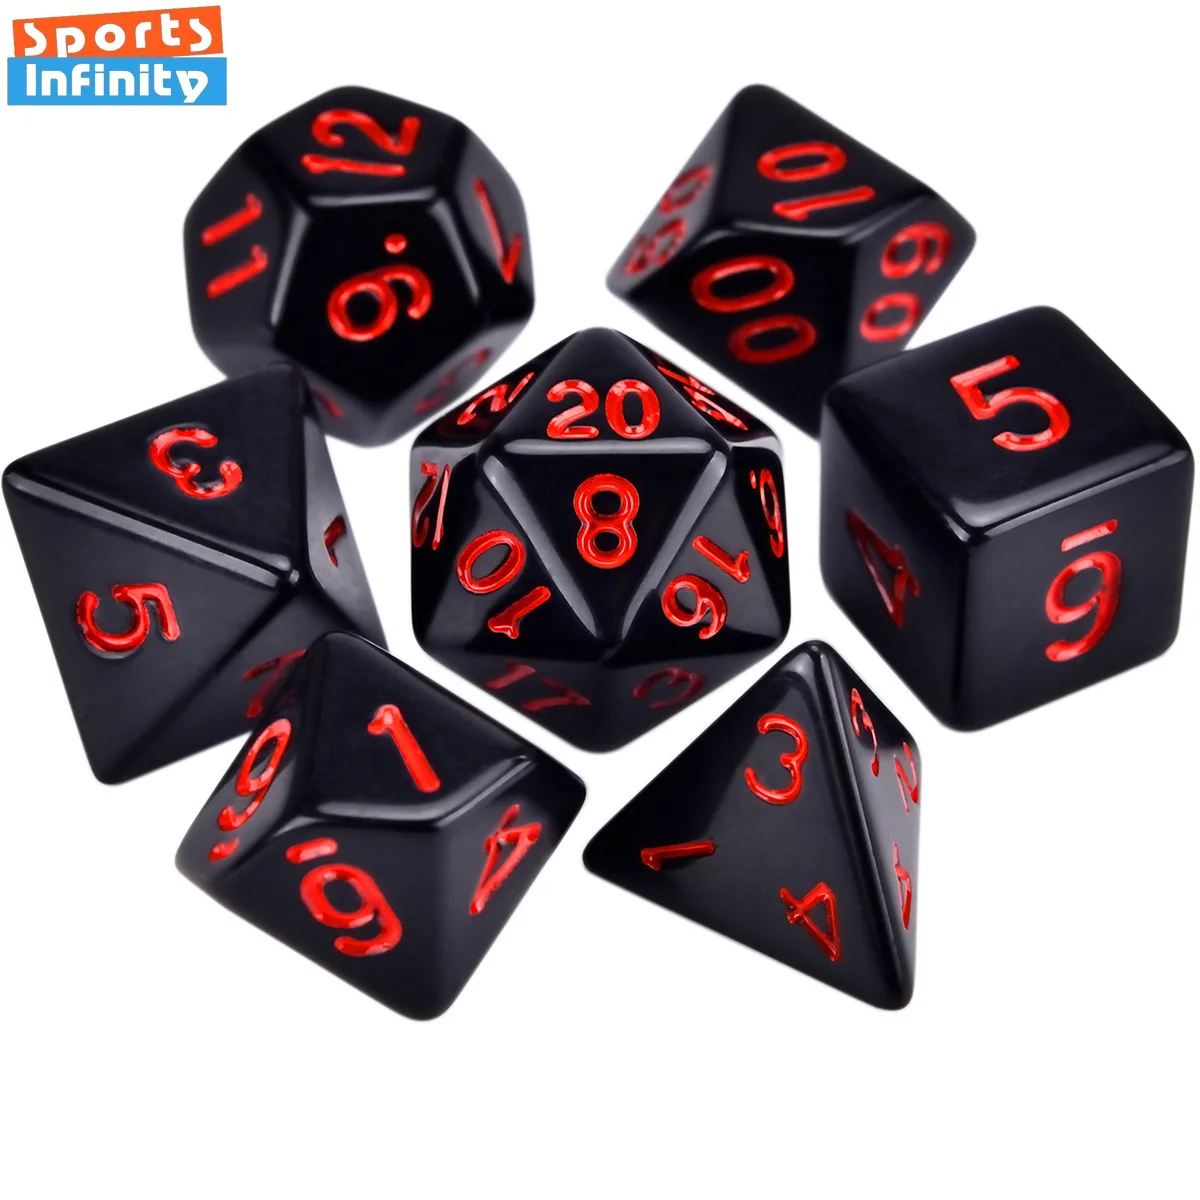 

7 Pcs Lot Black Red Dices Set Double Color Polyhedral Numbers Dice Kit of D4 D6 D8 D10 D% D12 D20 for DND TRPG RPG Board Game